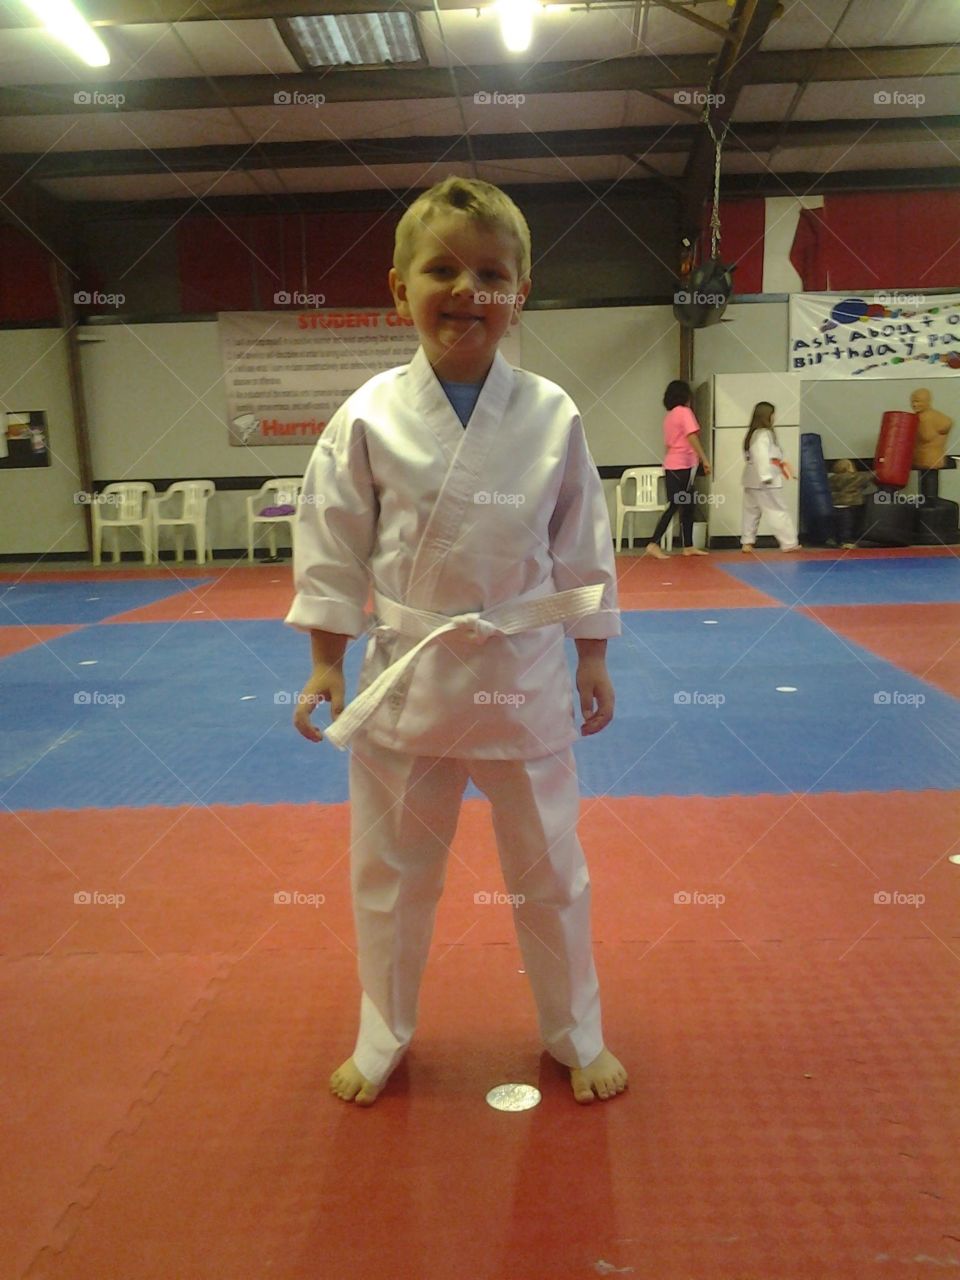 Learning martial arts and just oh so cute doing so